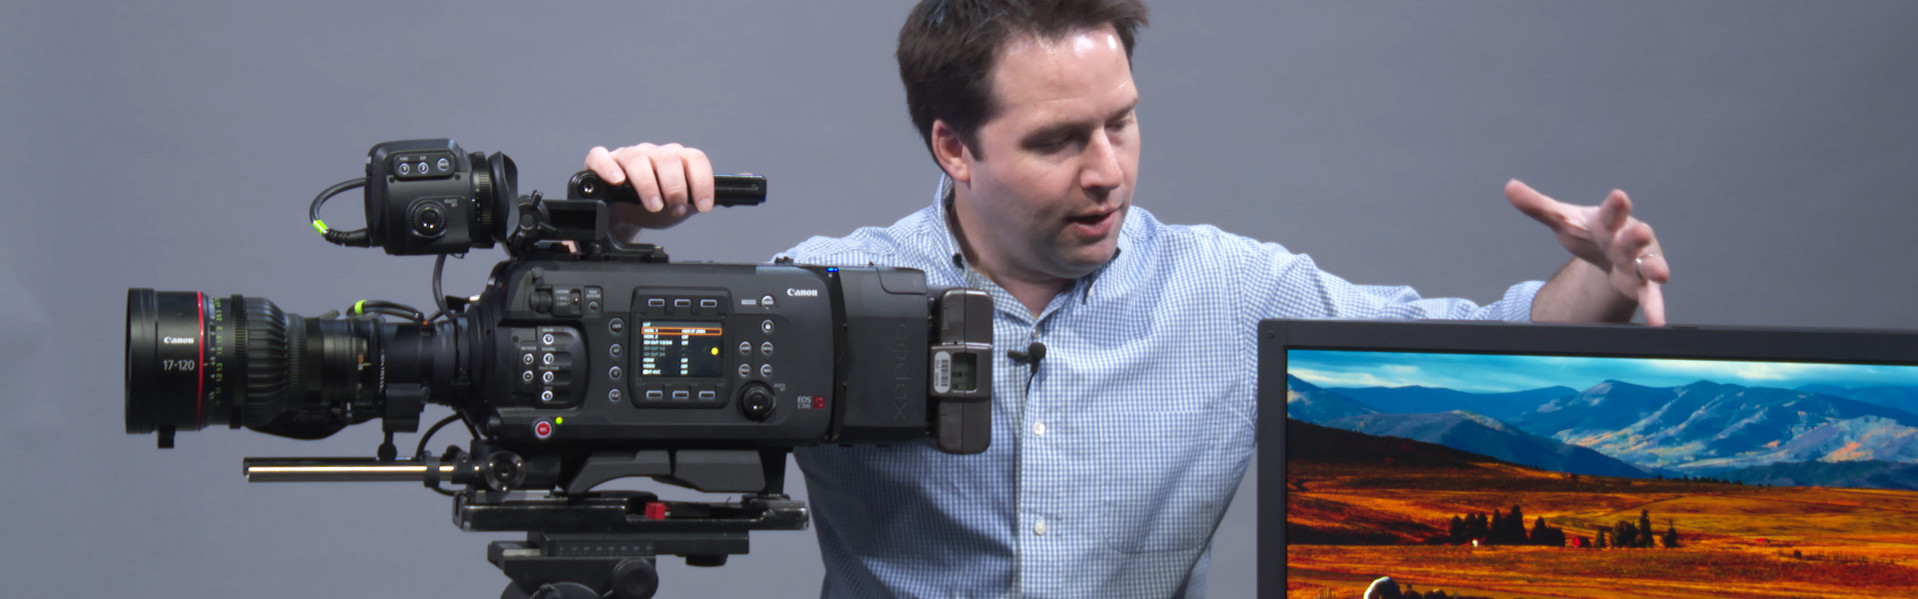 Header image for article At the Bench: A Look at the Canon C700 and DP-V2420 Monitor